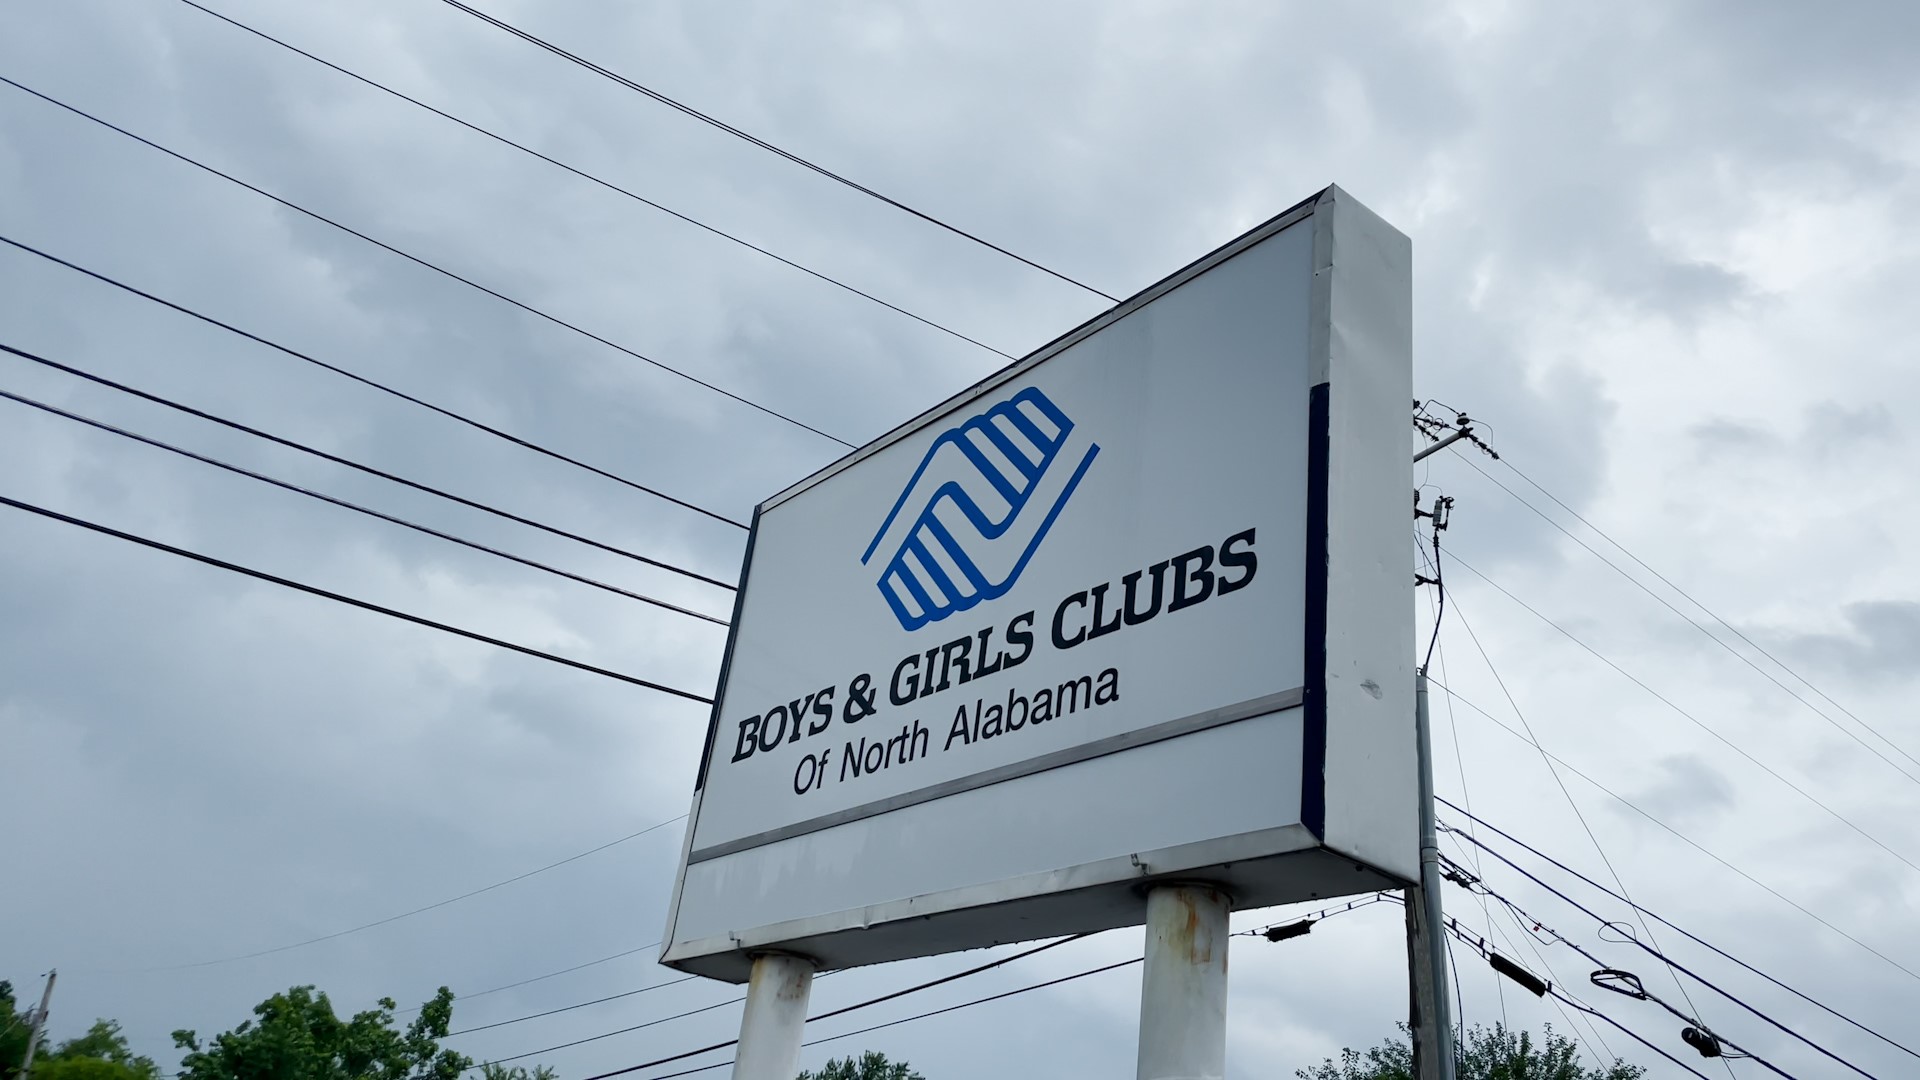 The Boys and Girls Clubs of North Alabama are expanding!